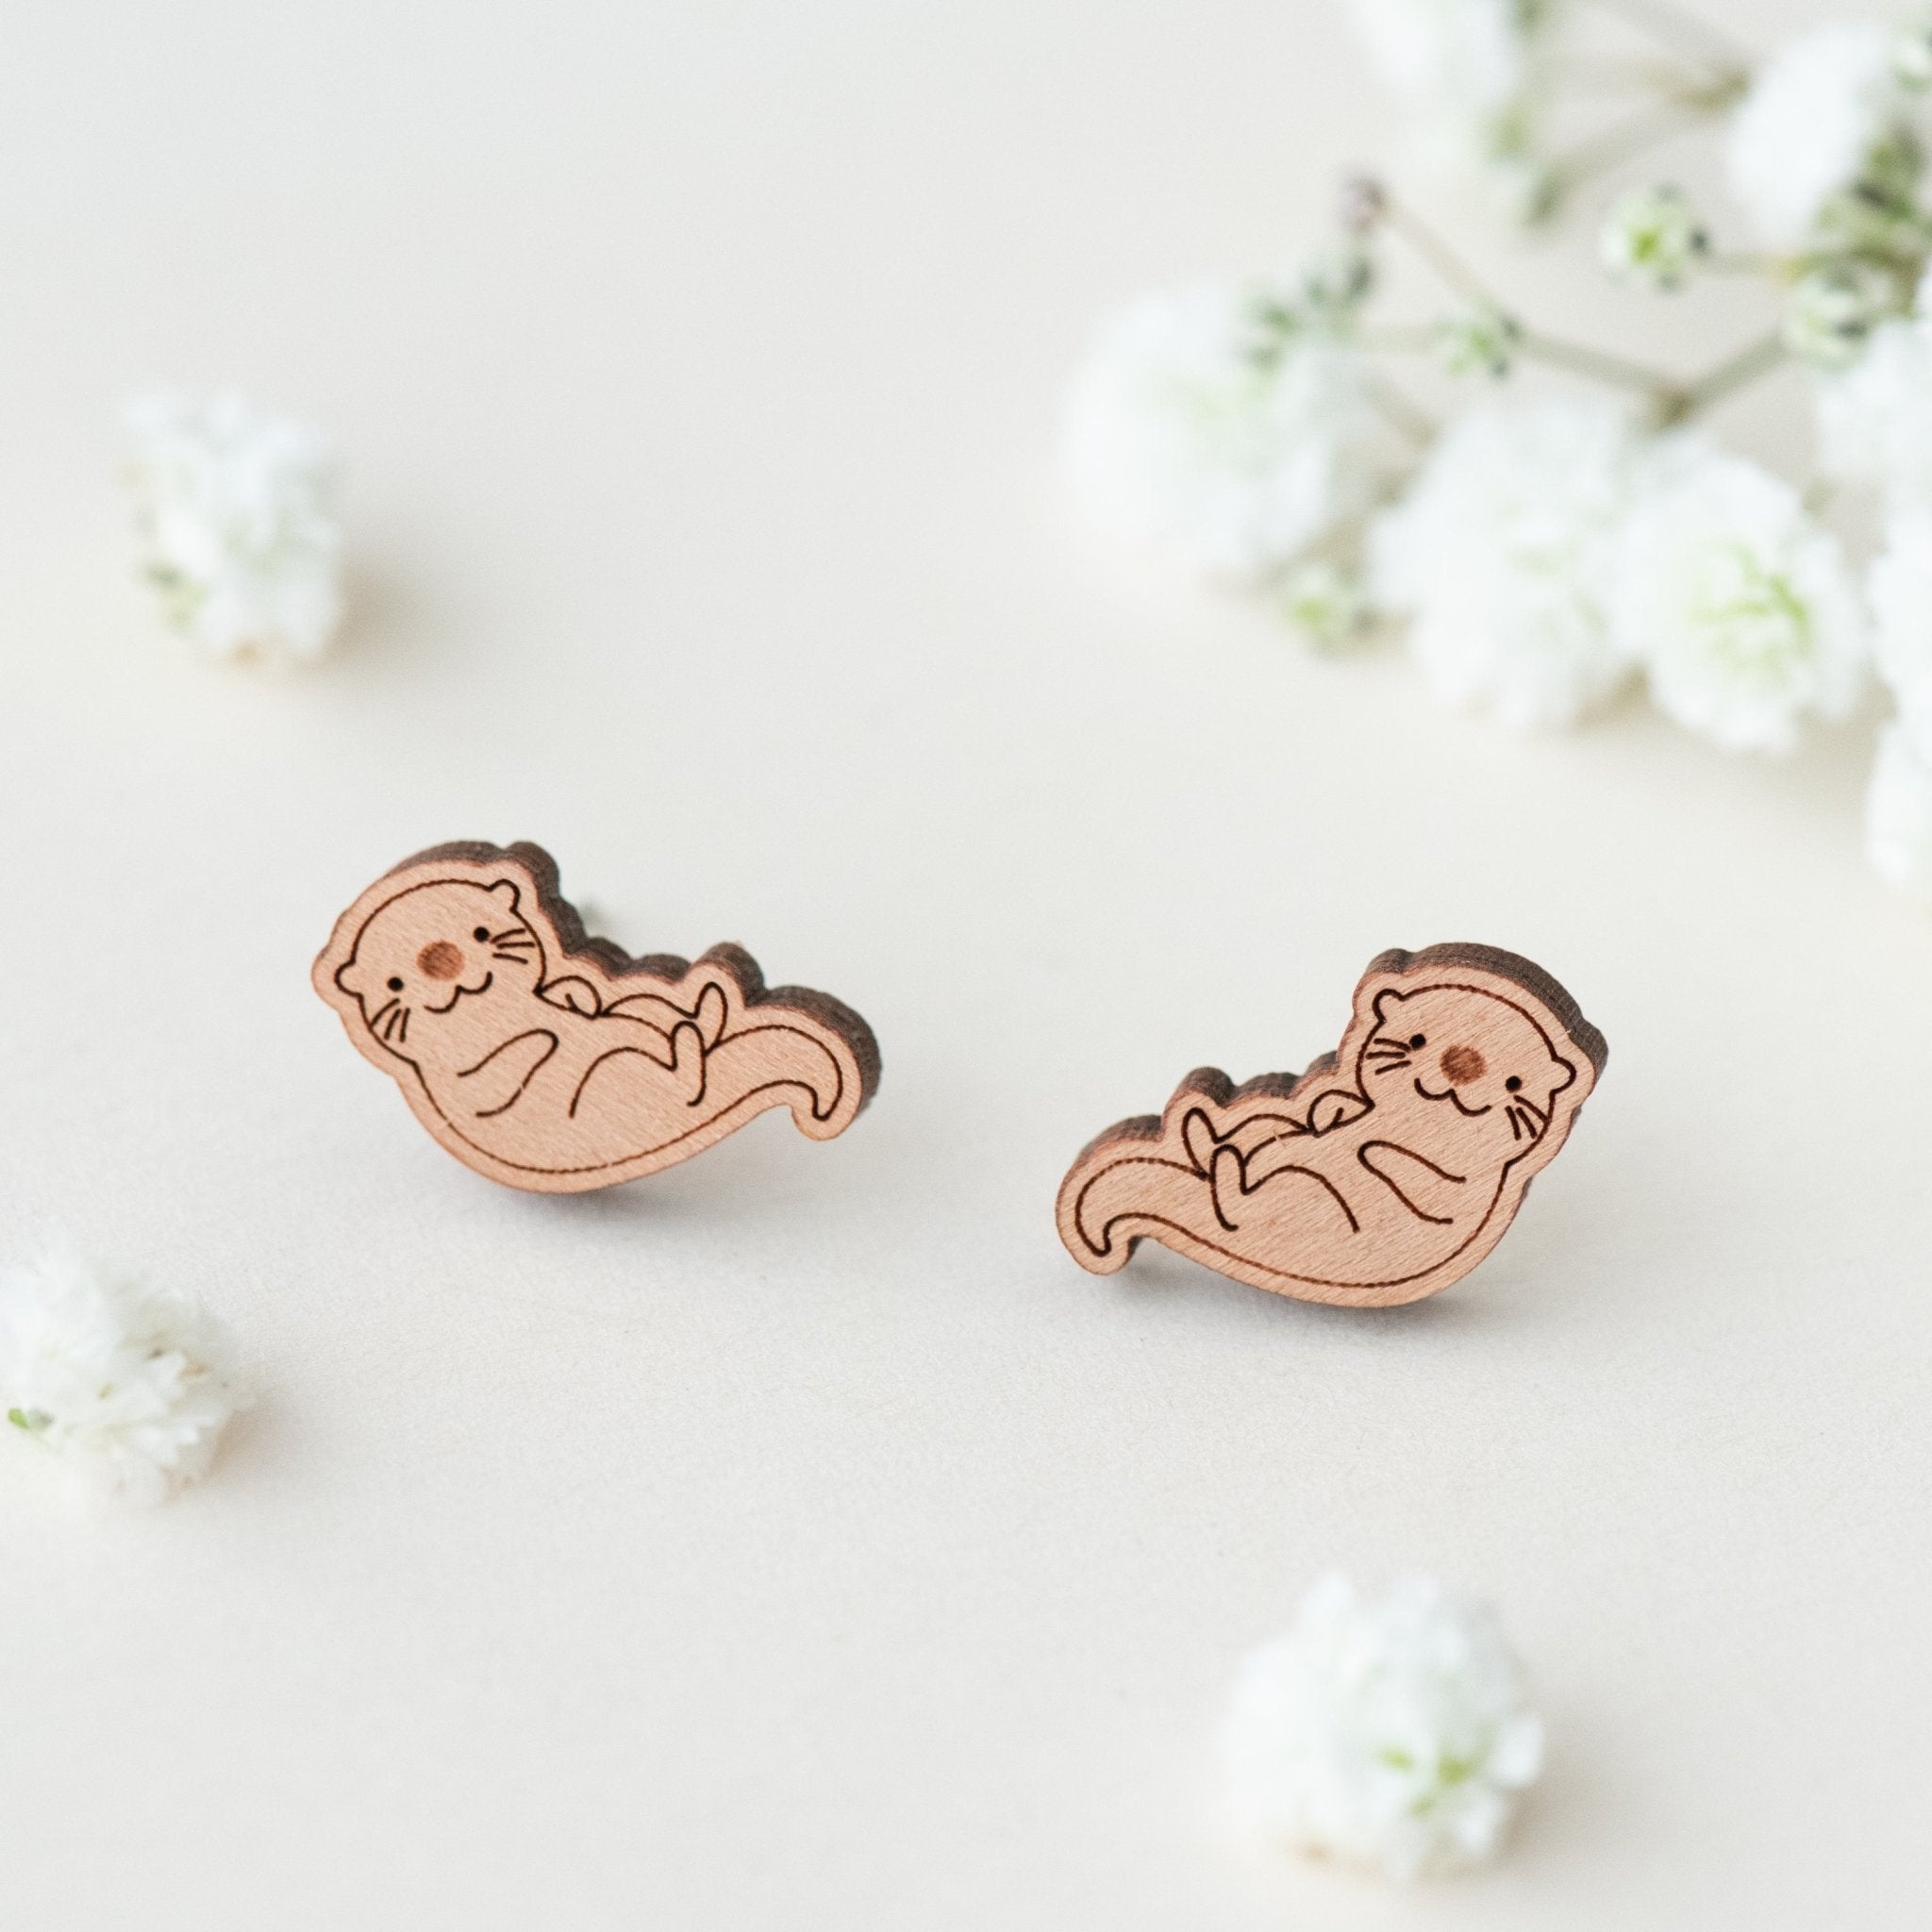 Otter Wooden Earrings - ES13003 - Robin Valley Official Store